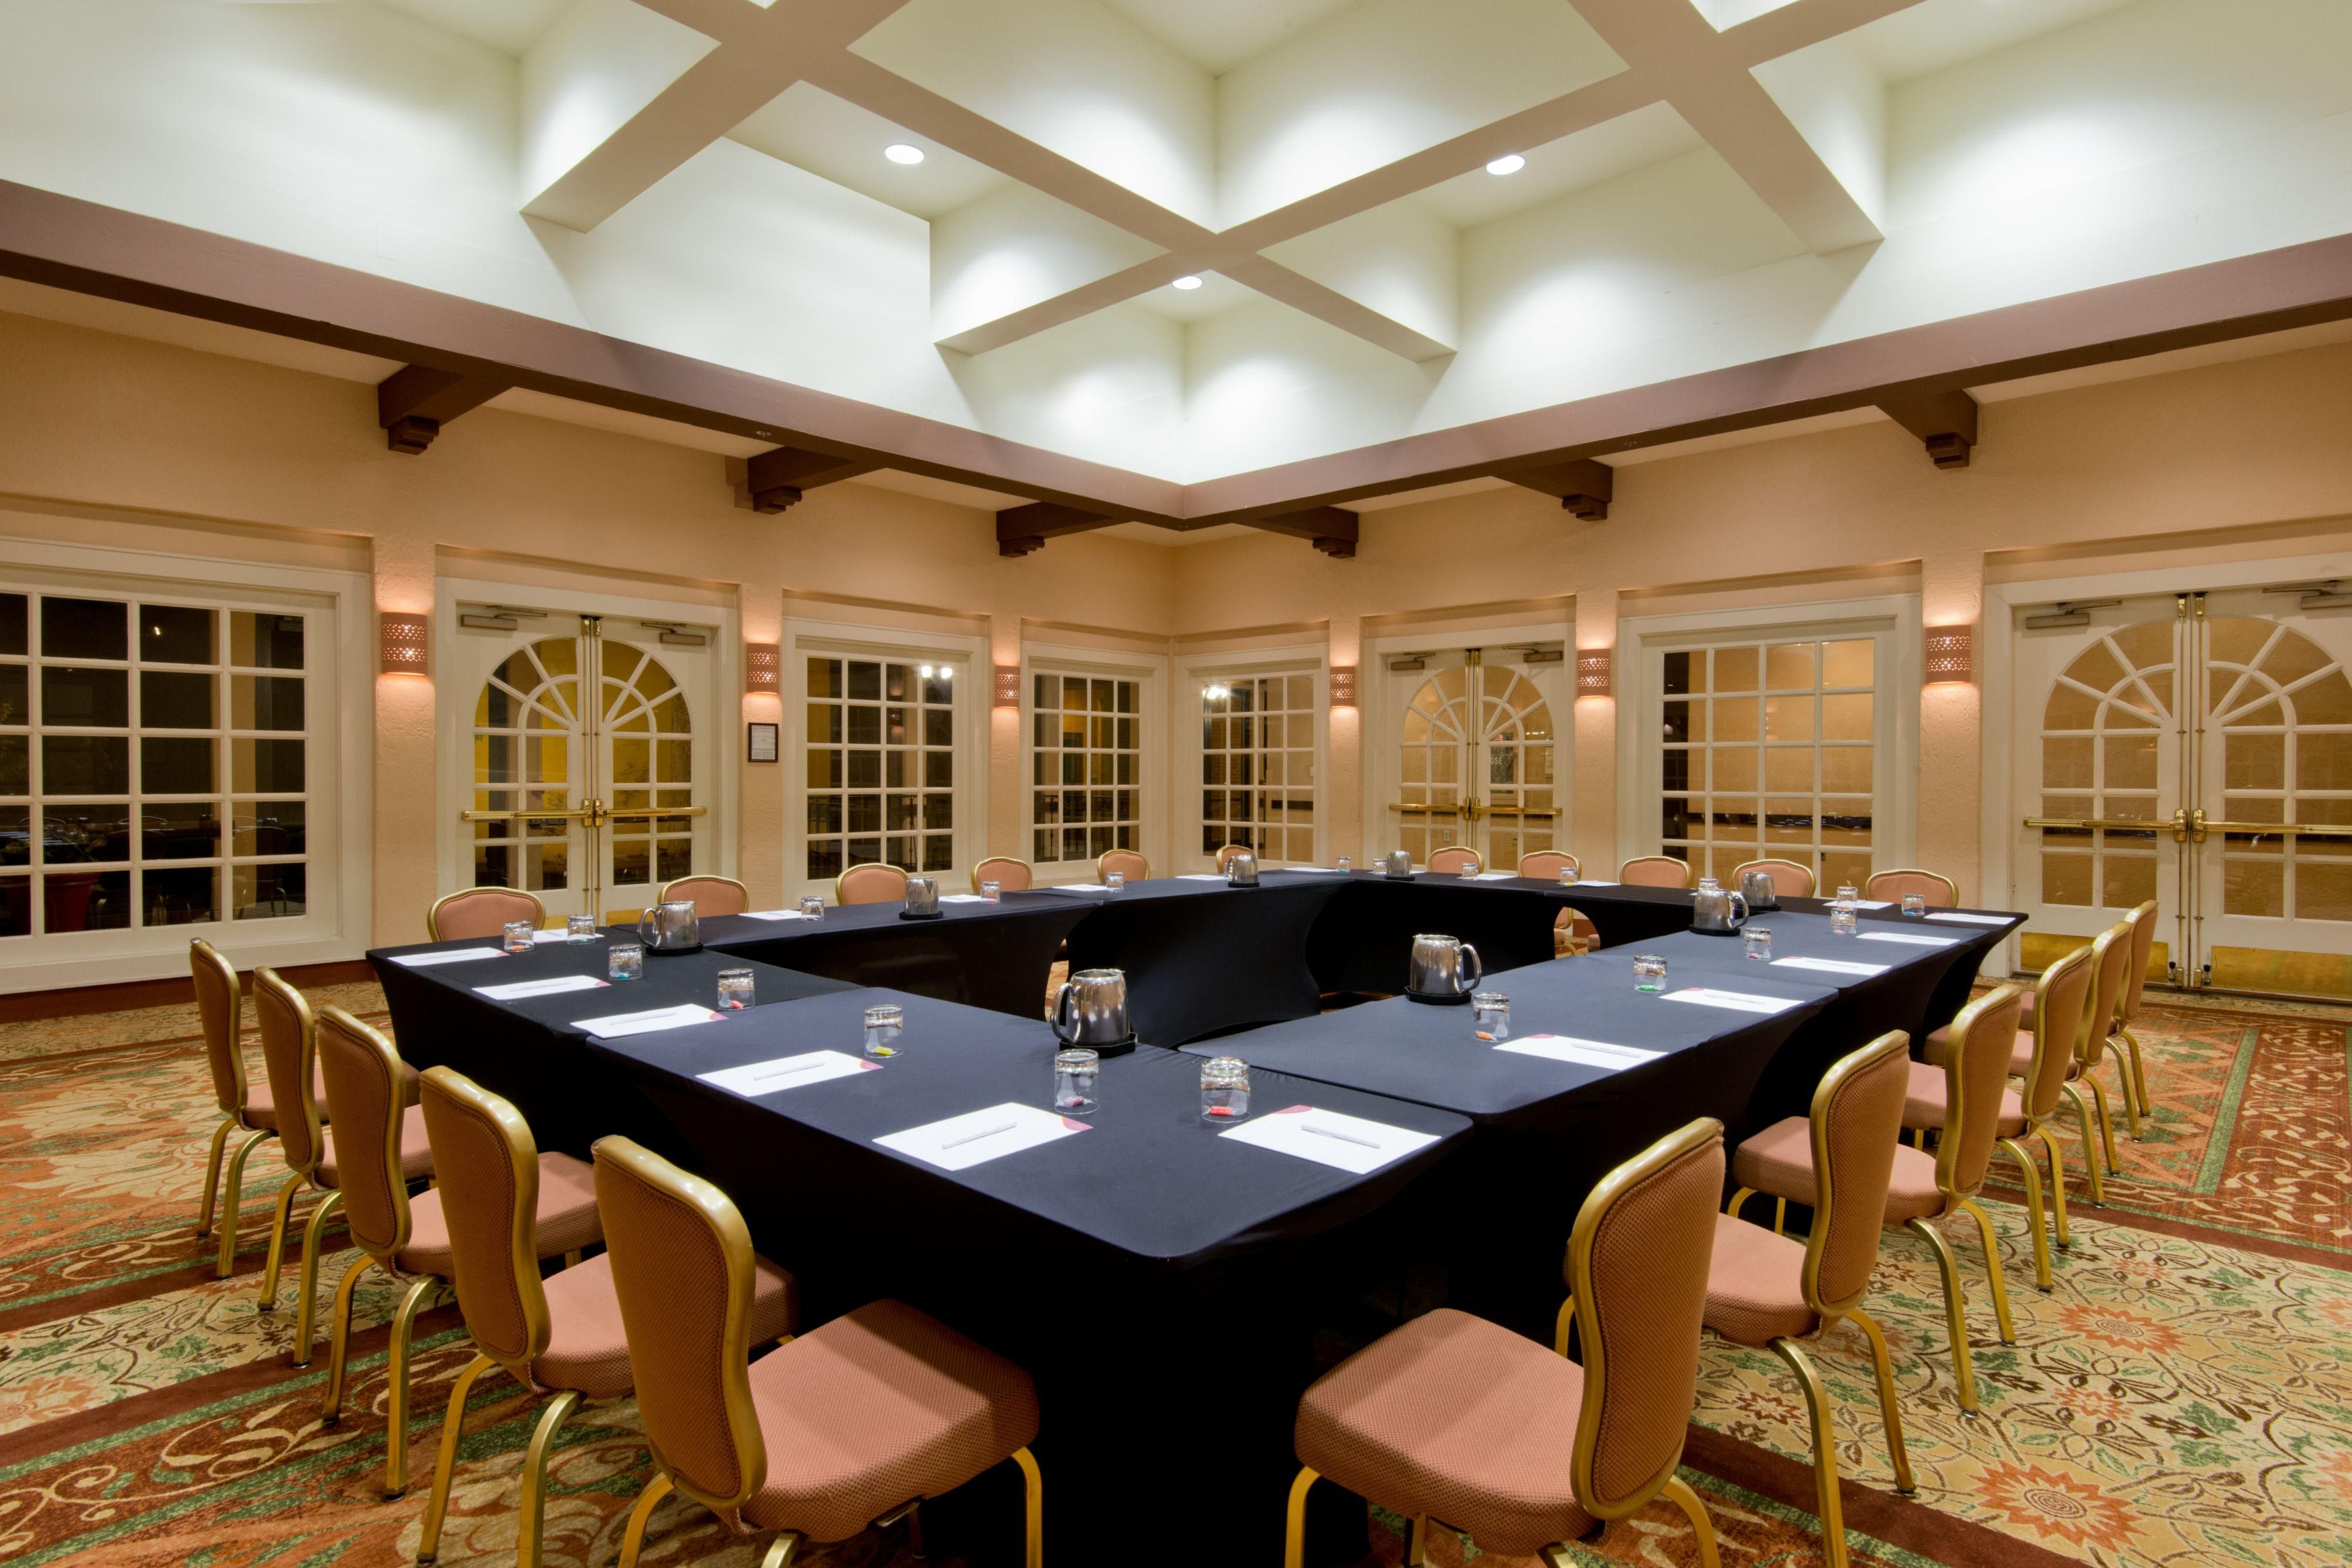 The Meeting Room is well-equipped for your business needs